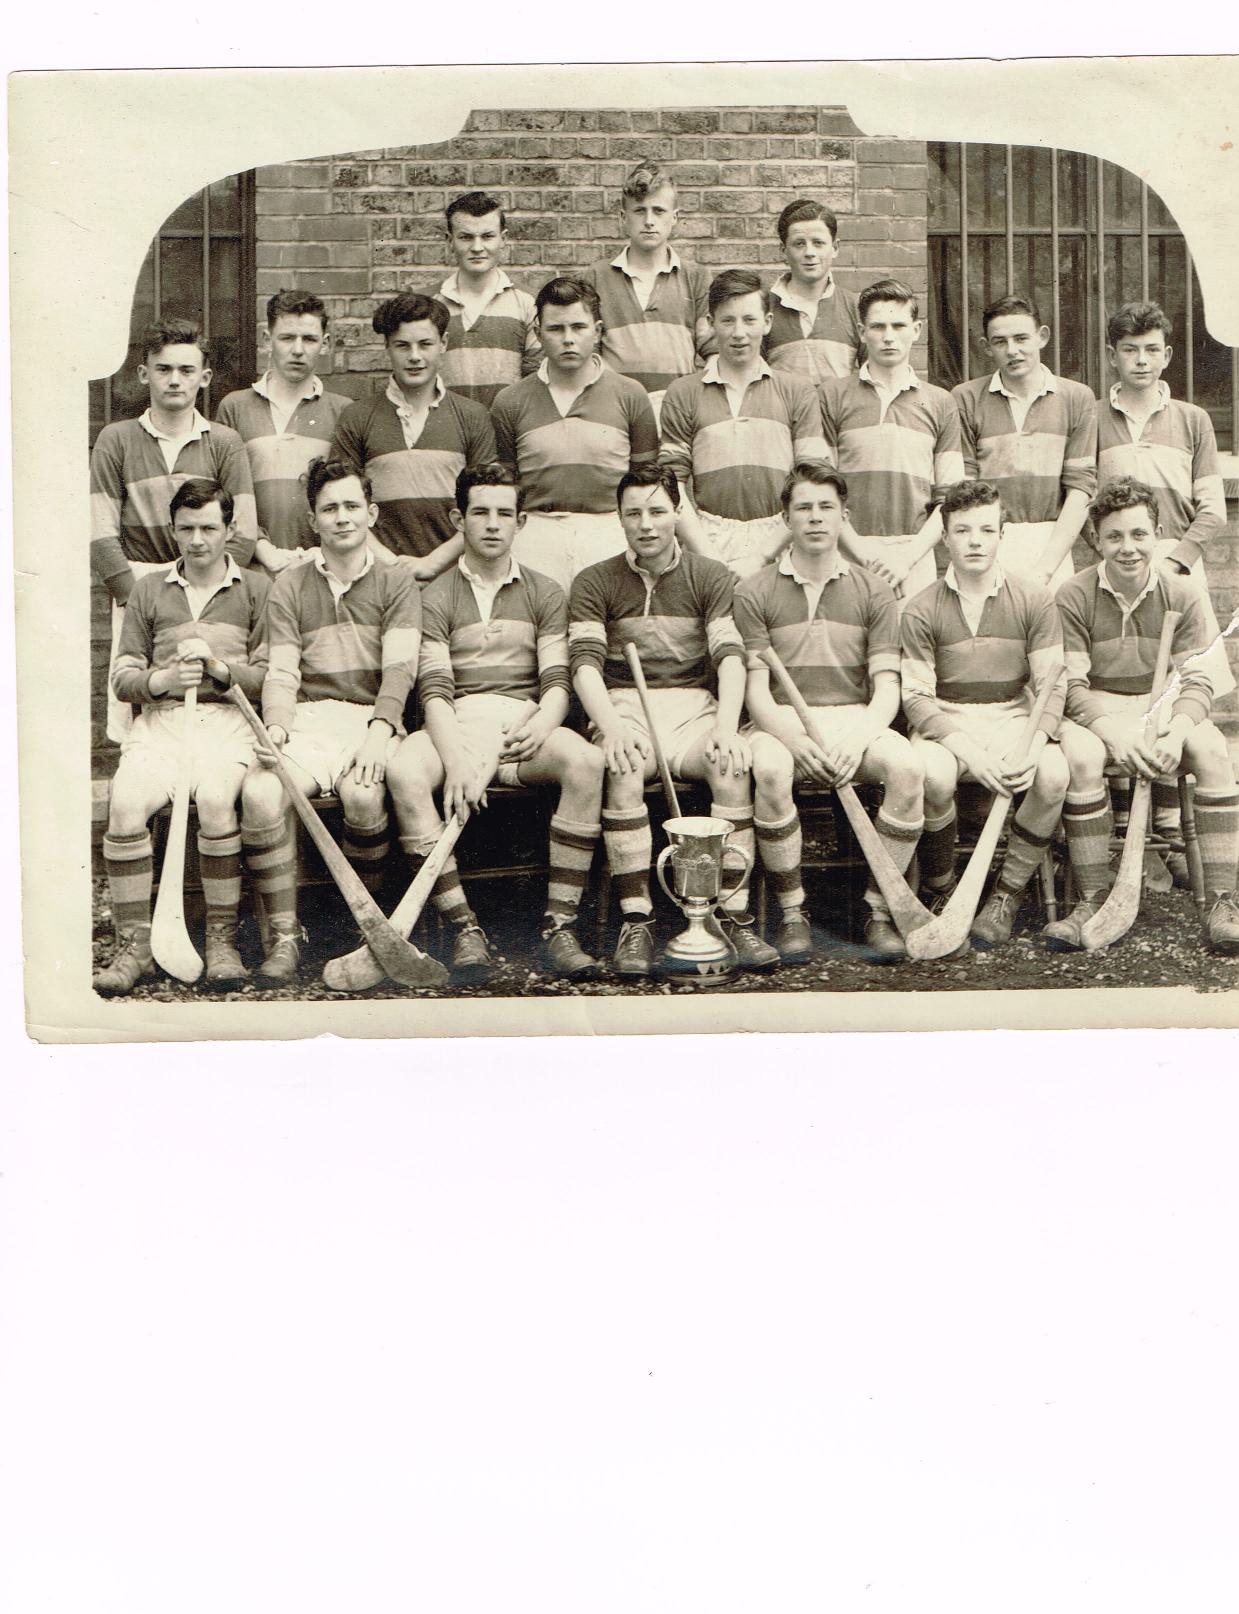 1950 Leinster Colleges Hurling Champions